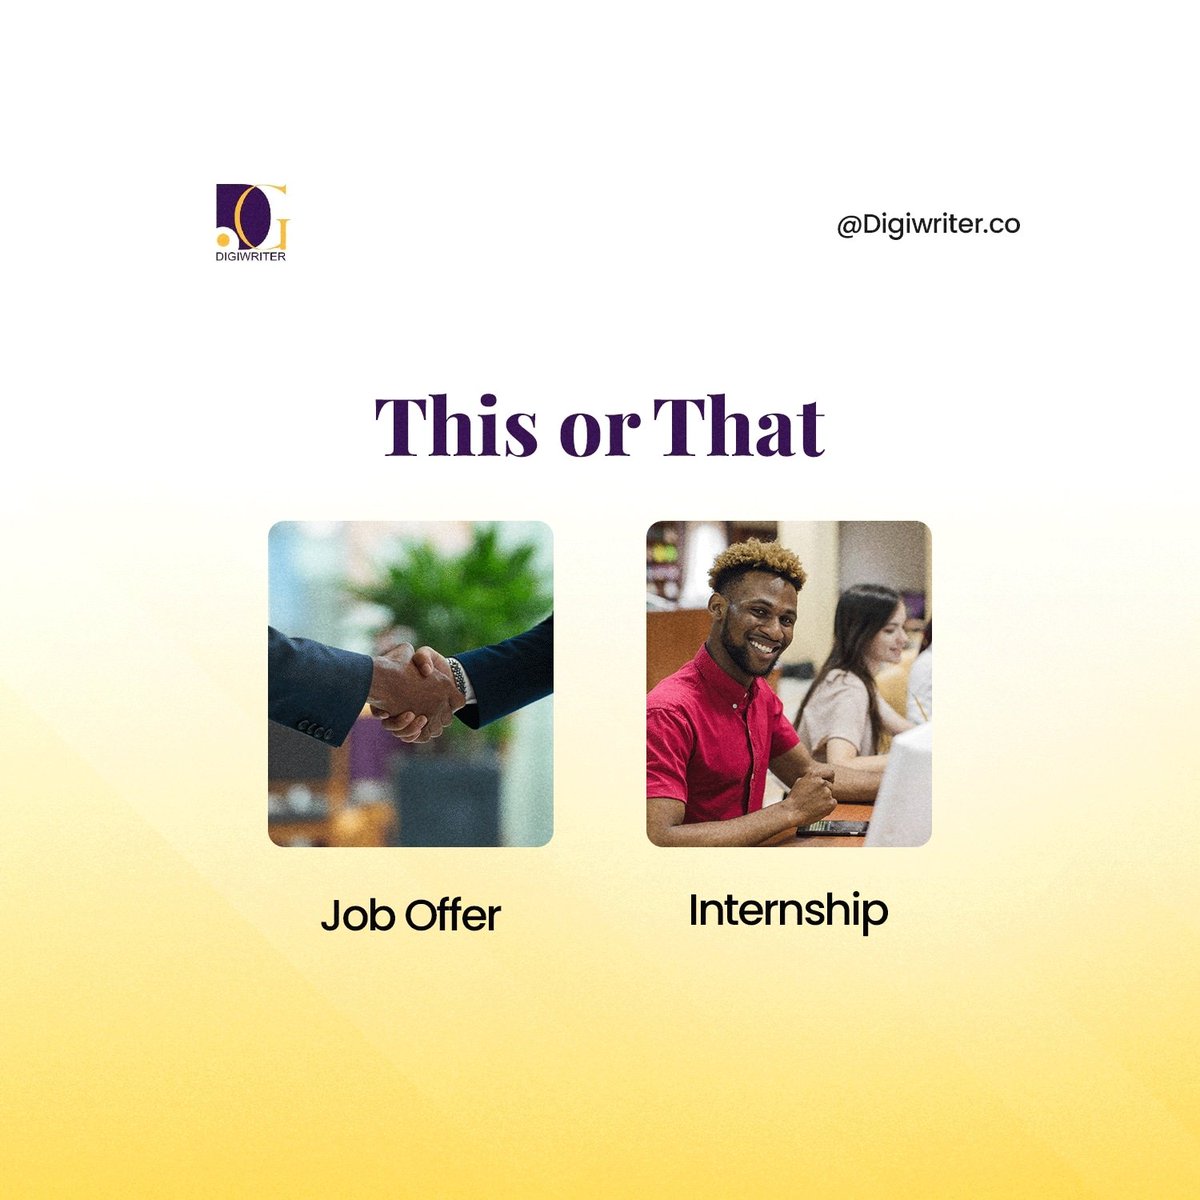 What are you currently applying for? Join our community to get first-hand information. 

#digiwriter #jobvacancy #interviewseries #interview #internships #Careers